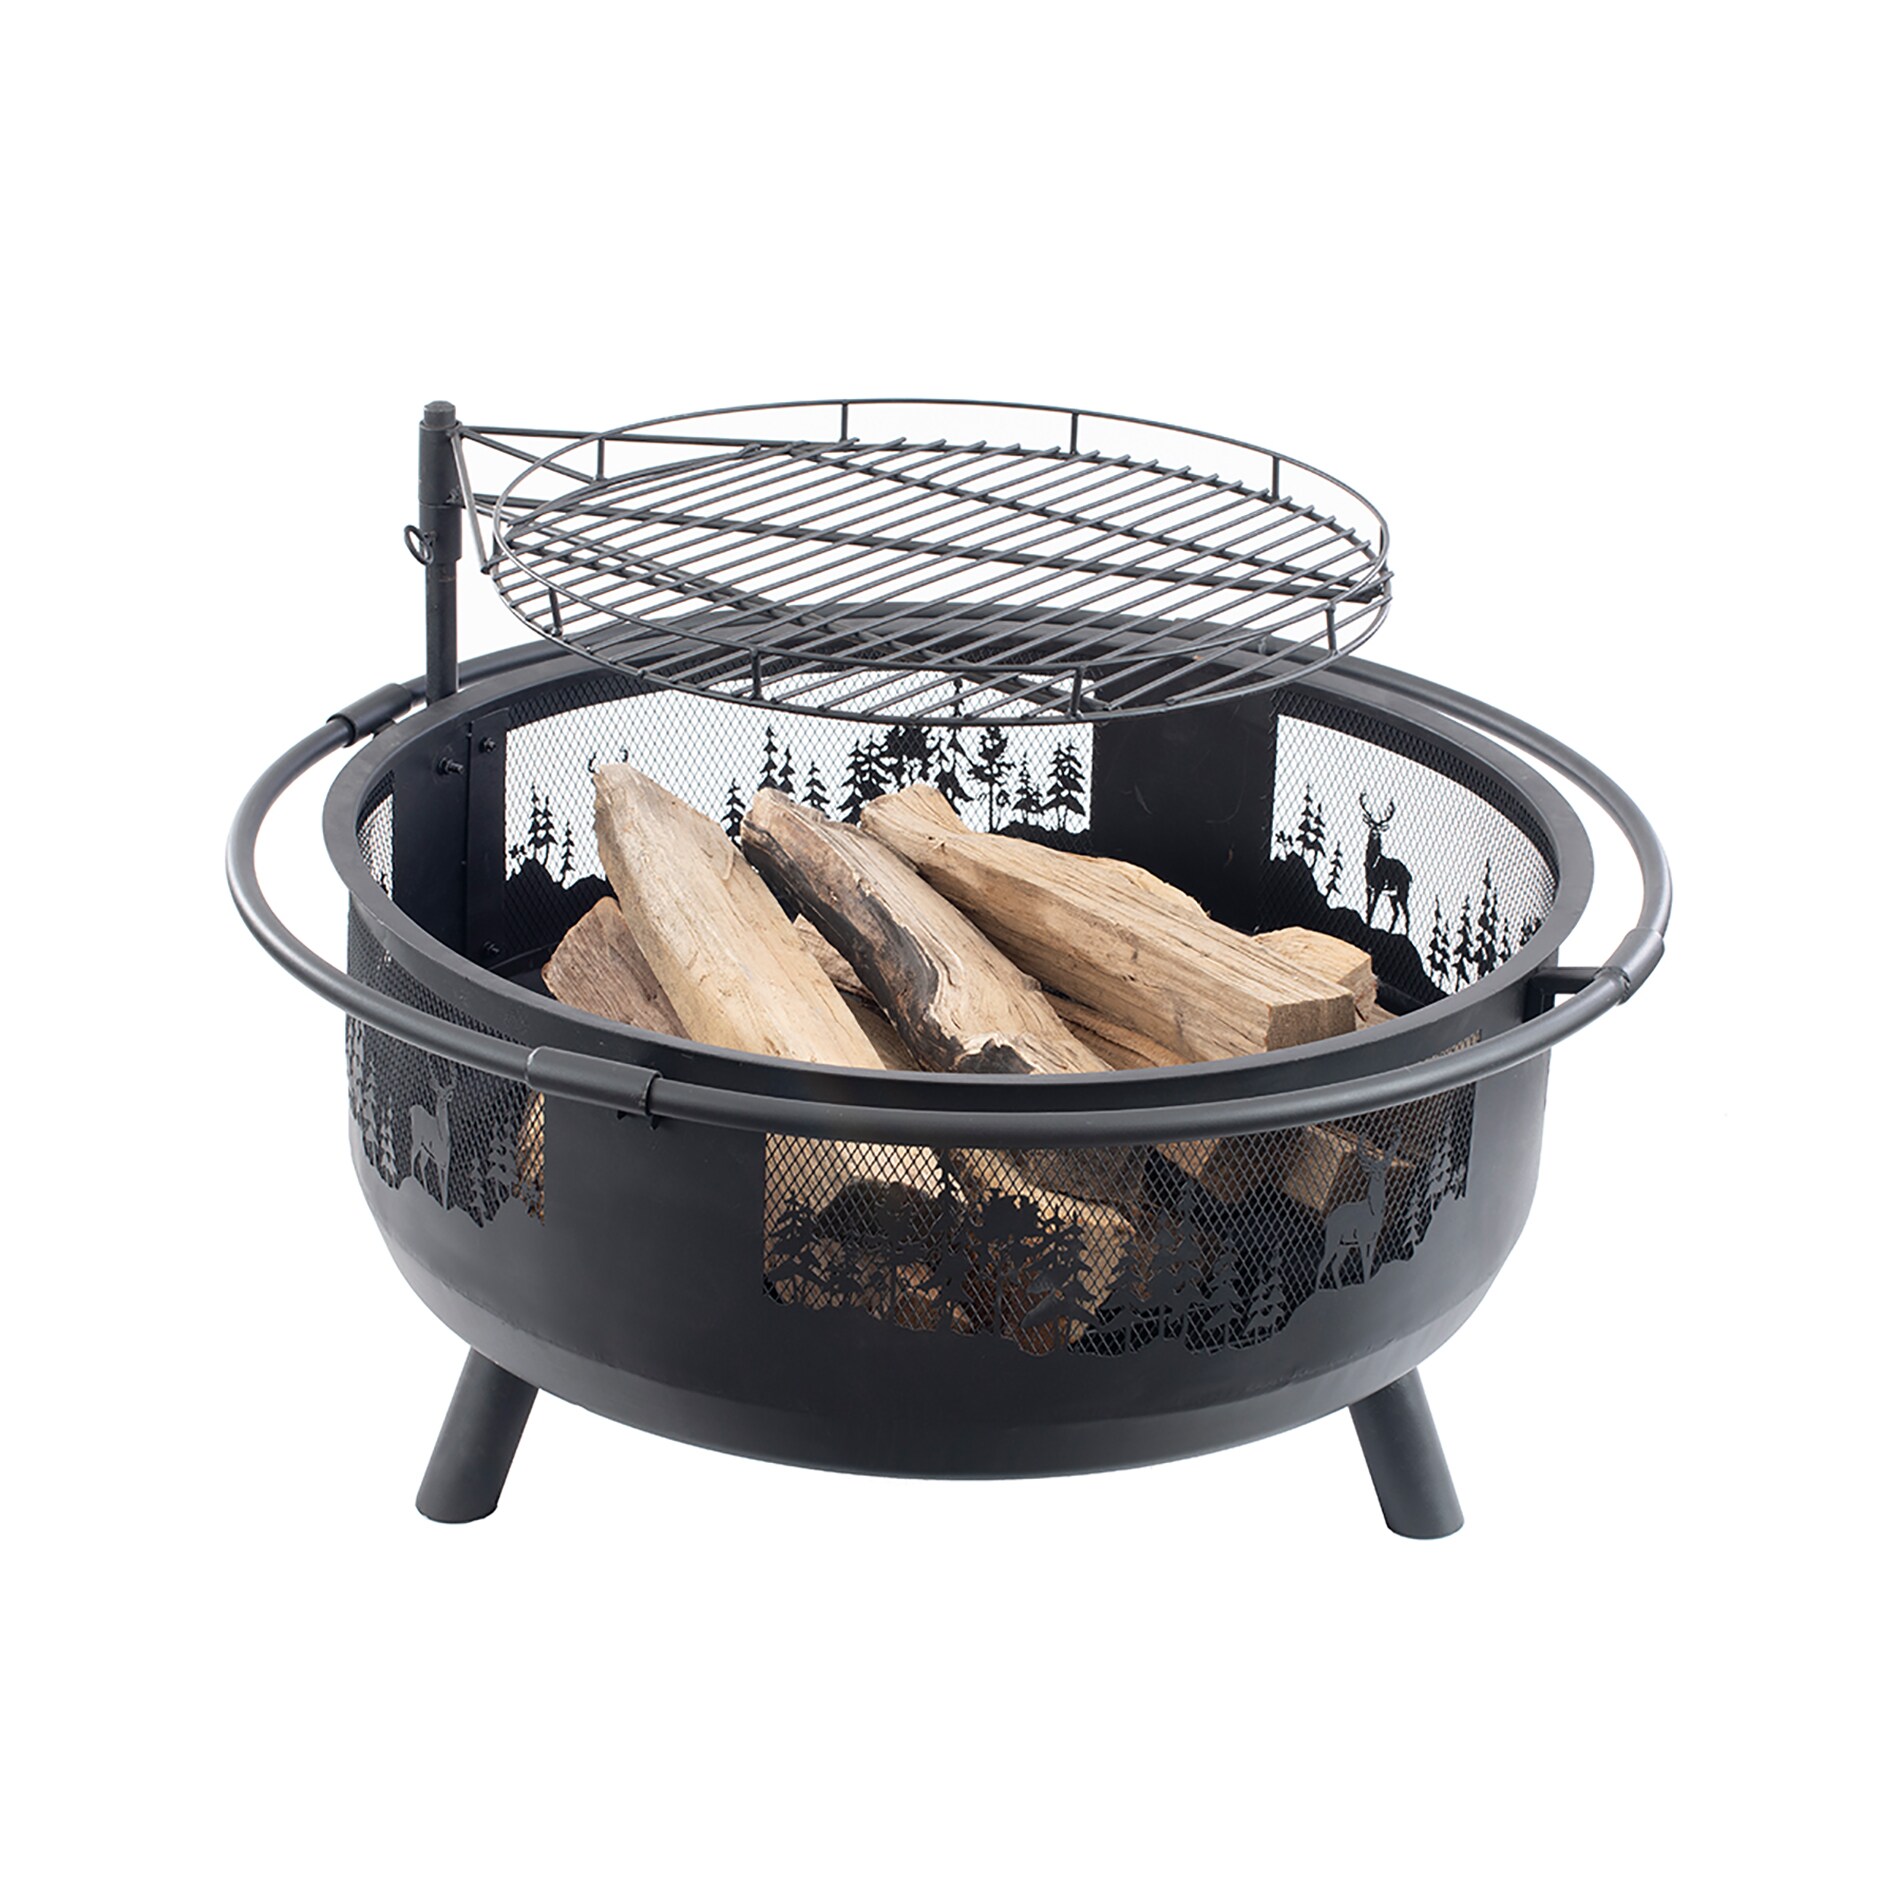 Blue Sky WBFB36SG-MD Outdoor Living 36-in W Black Steel Wood-Burning Fire Pit - 3